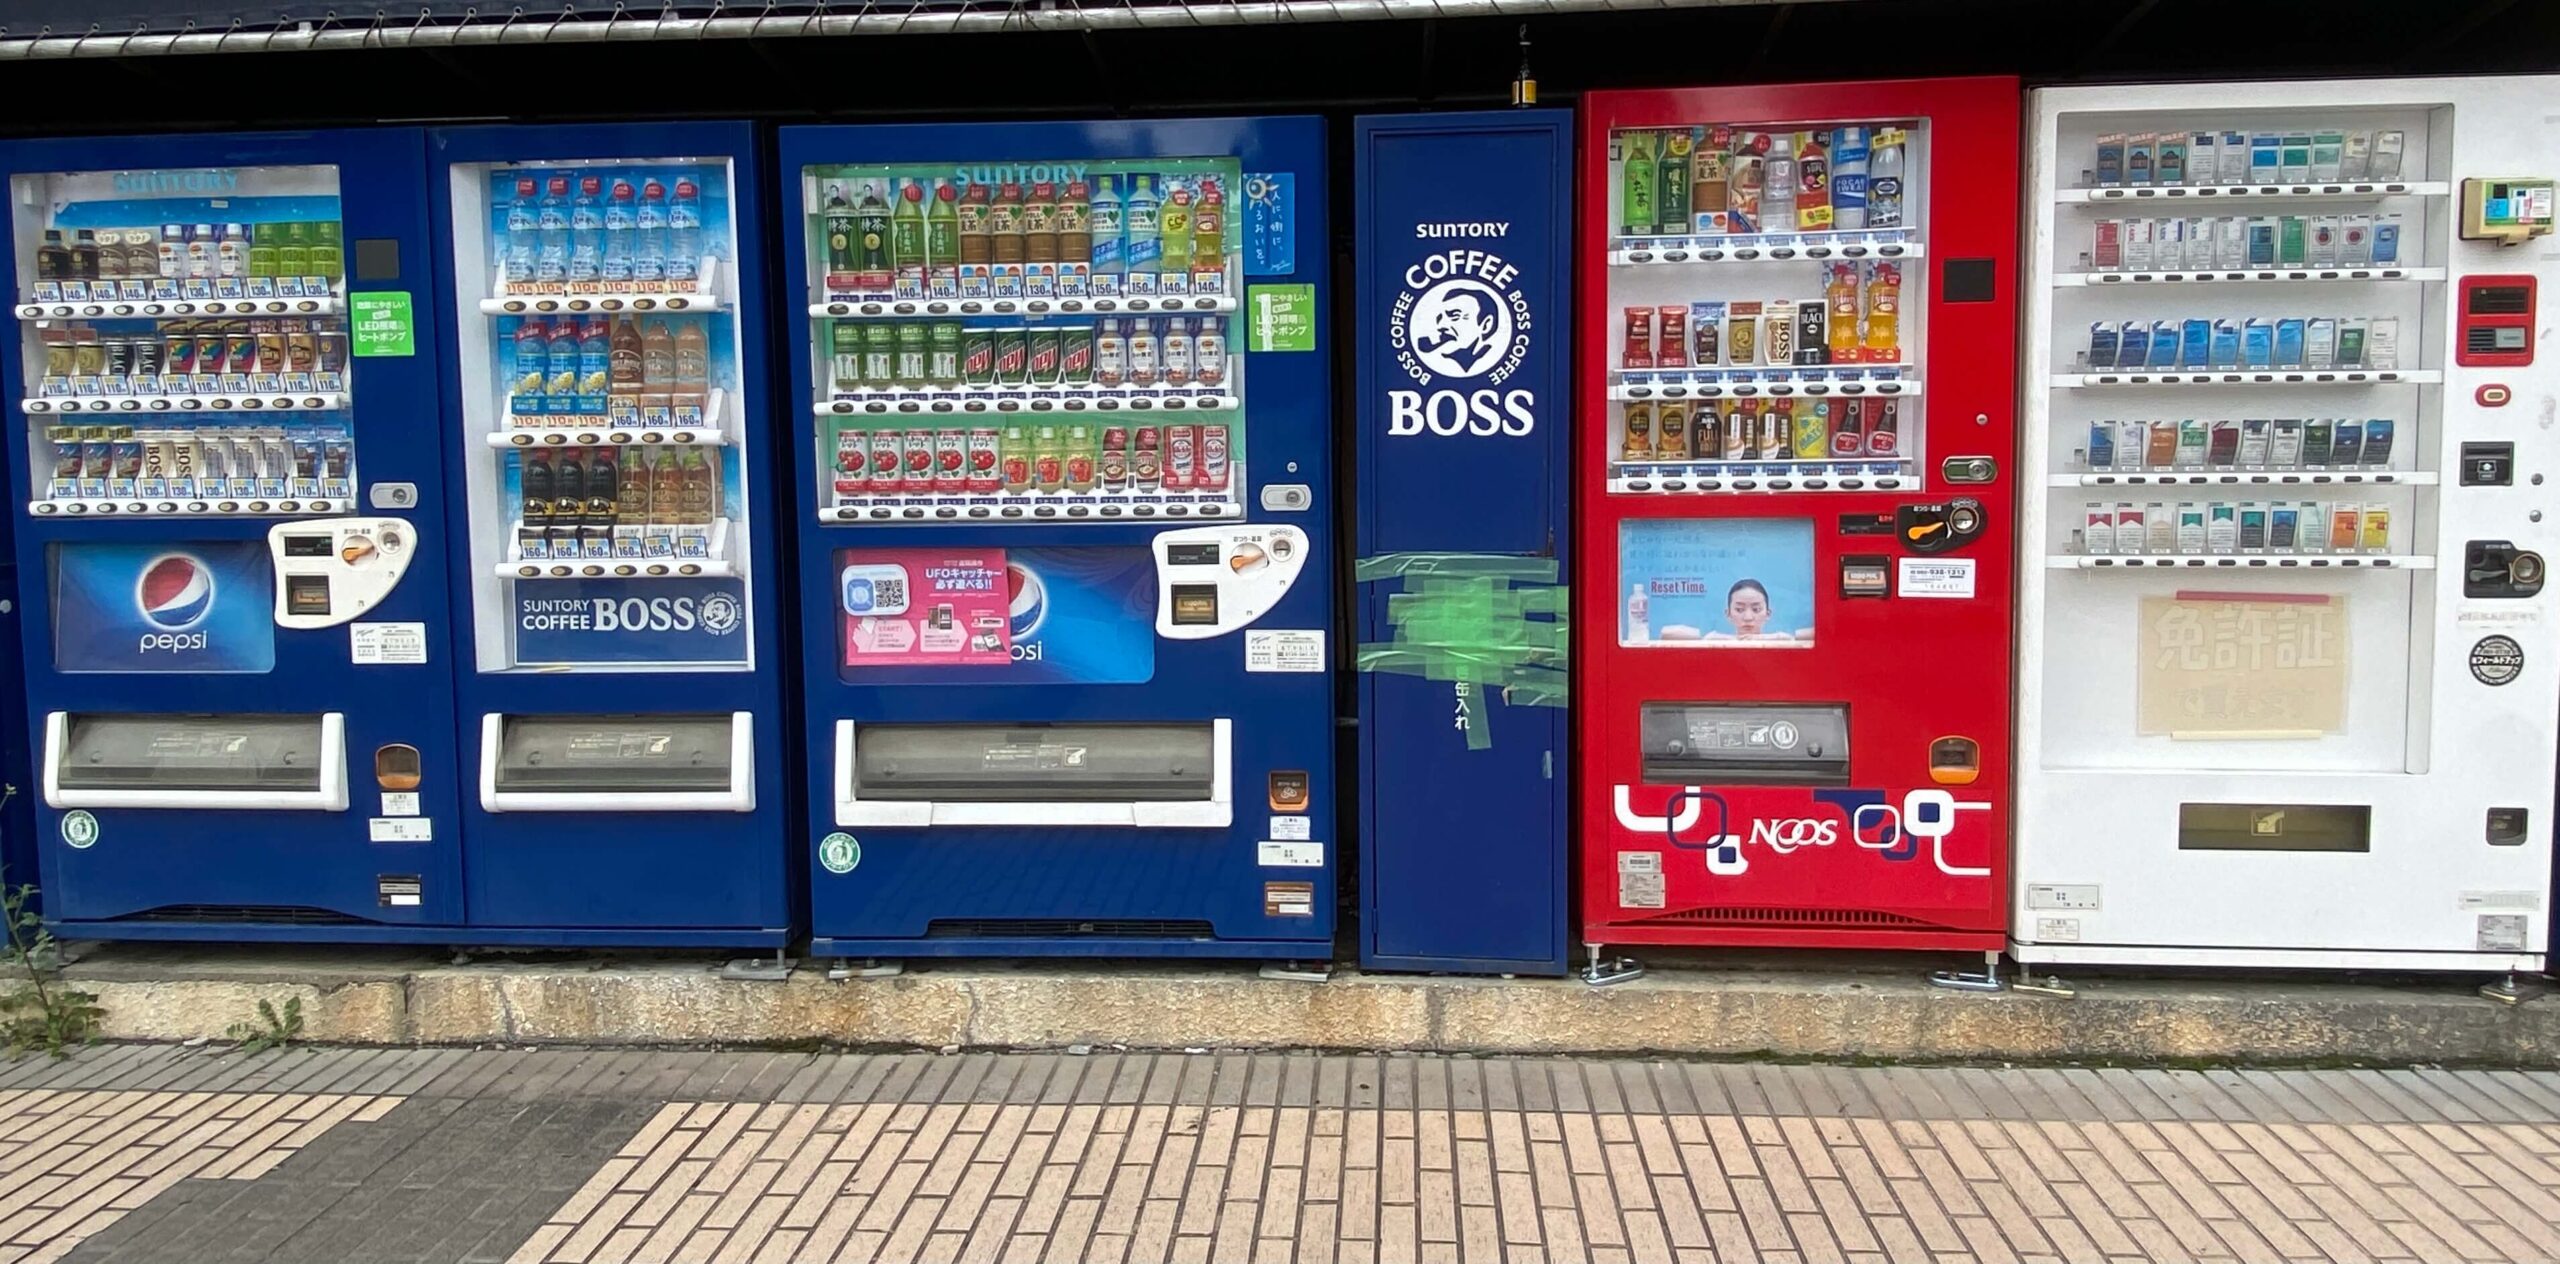 Vending Machines next to Each Other